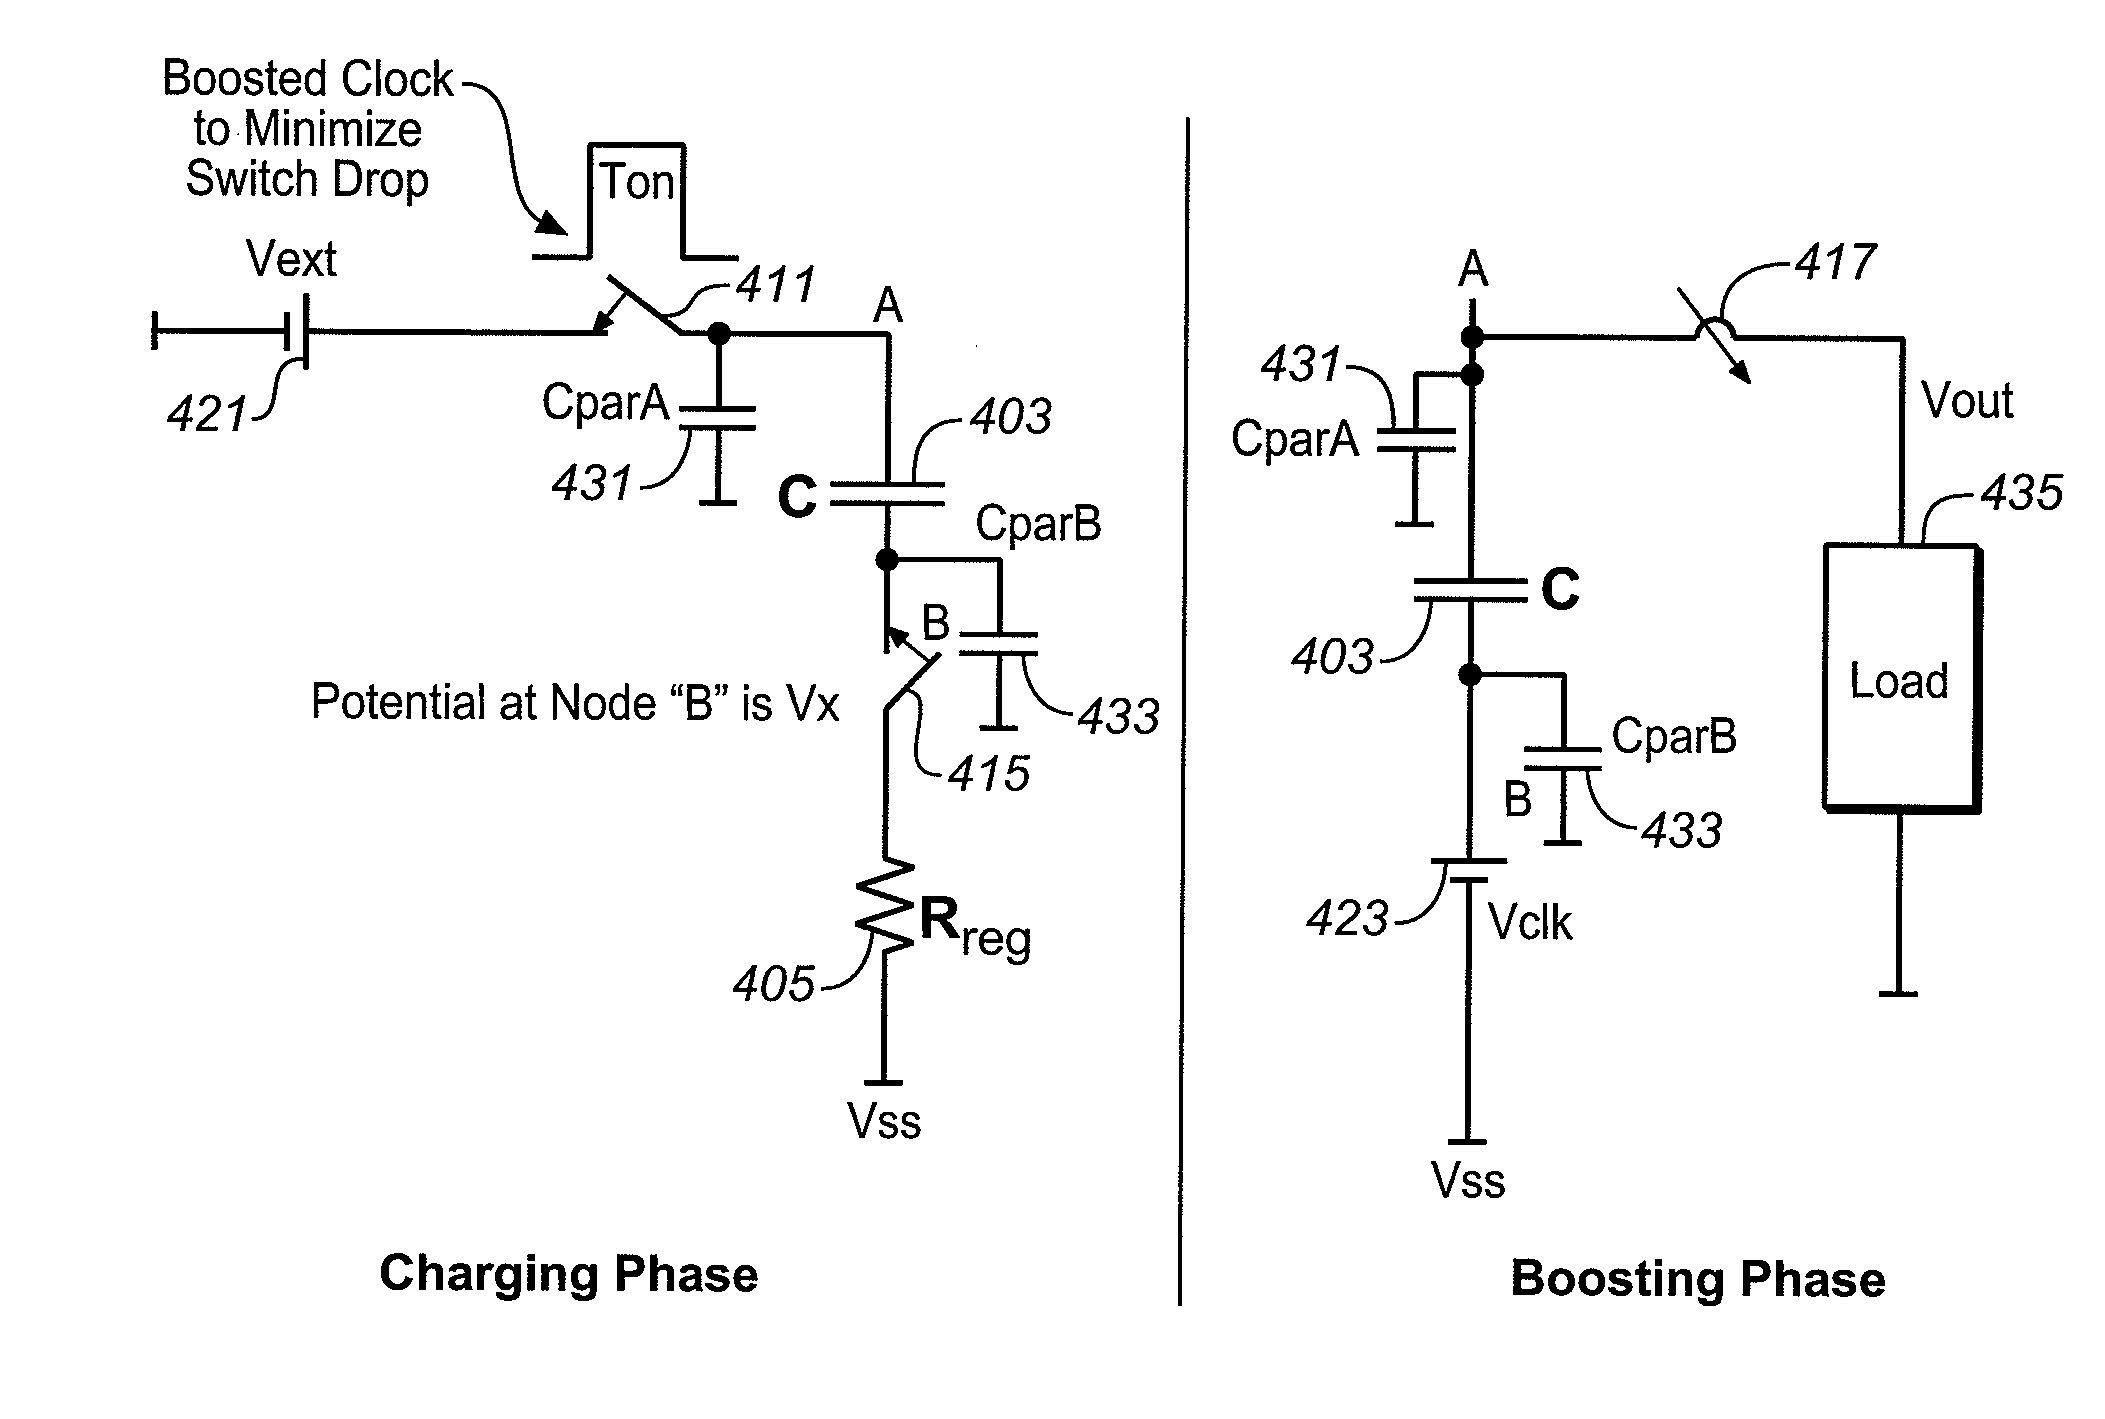 Bottom Plate Regulated Charge Pump